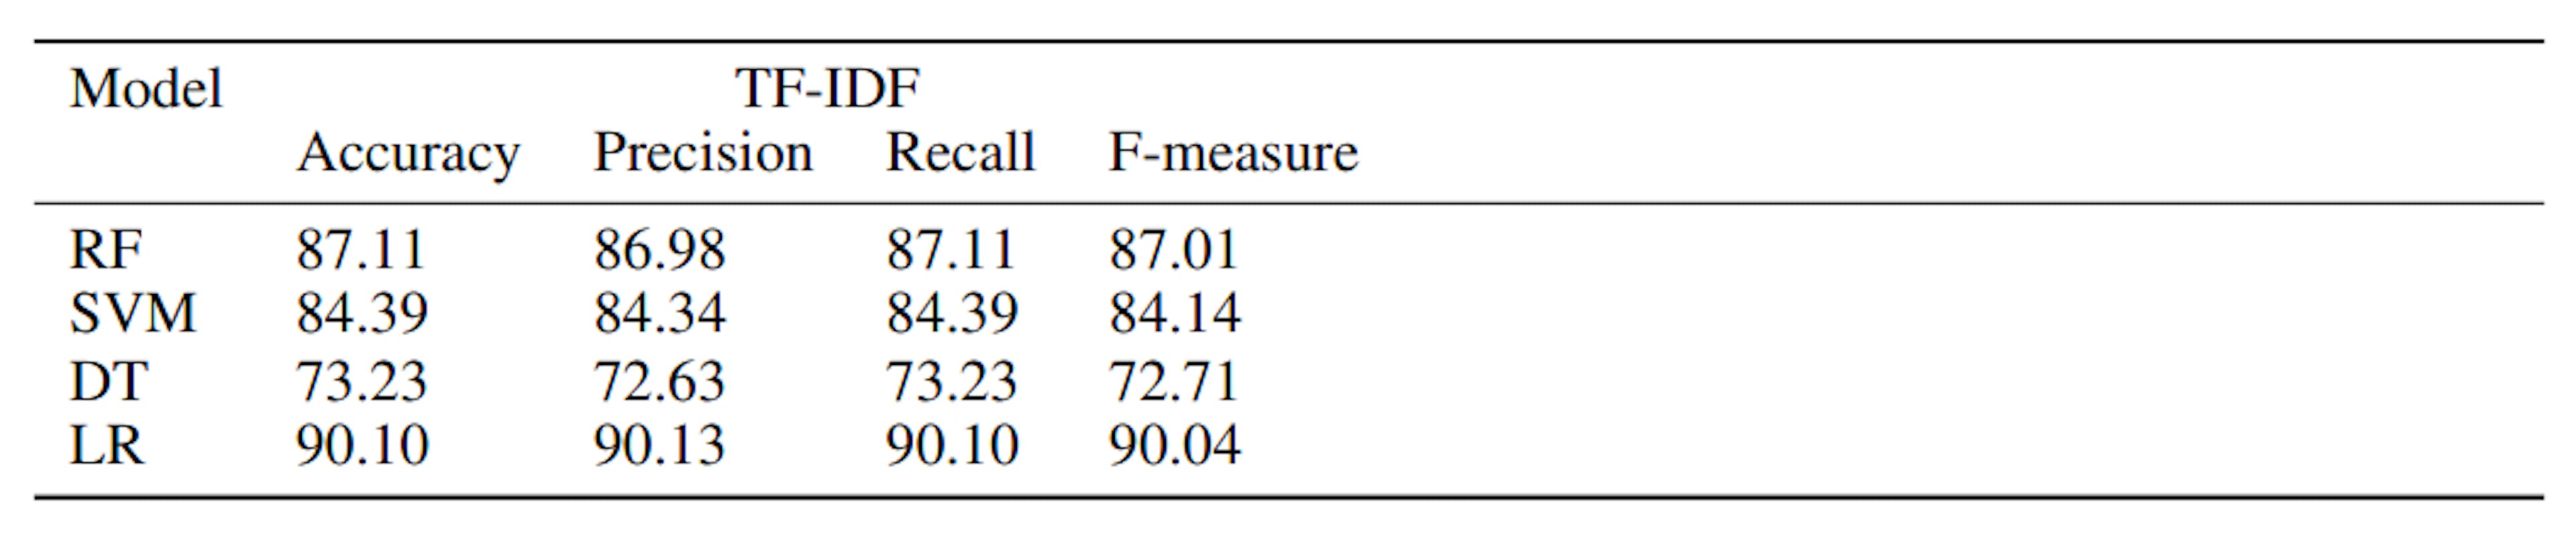 Table 2: Precision, Recall, Accuracy, and F-Measure values for the TF-IDF feature encoding